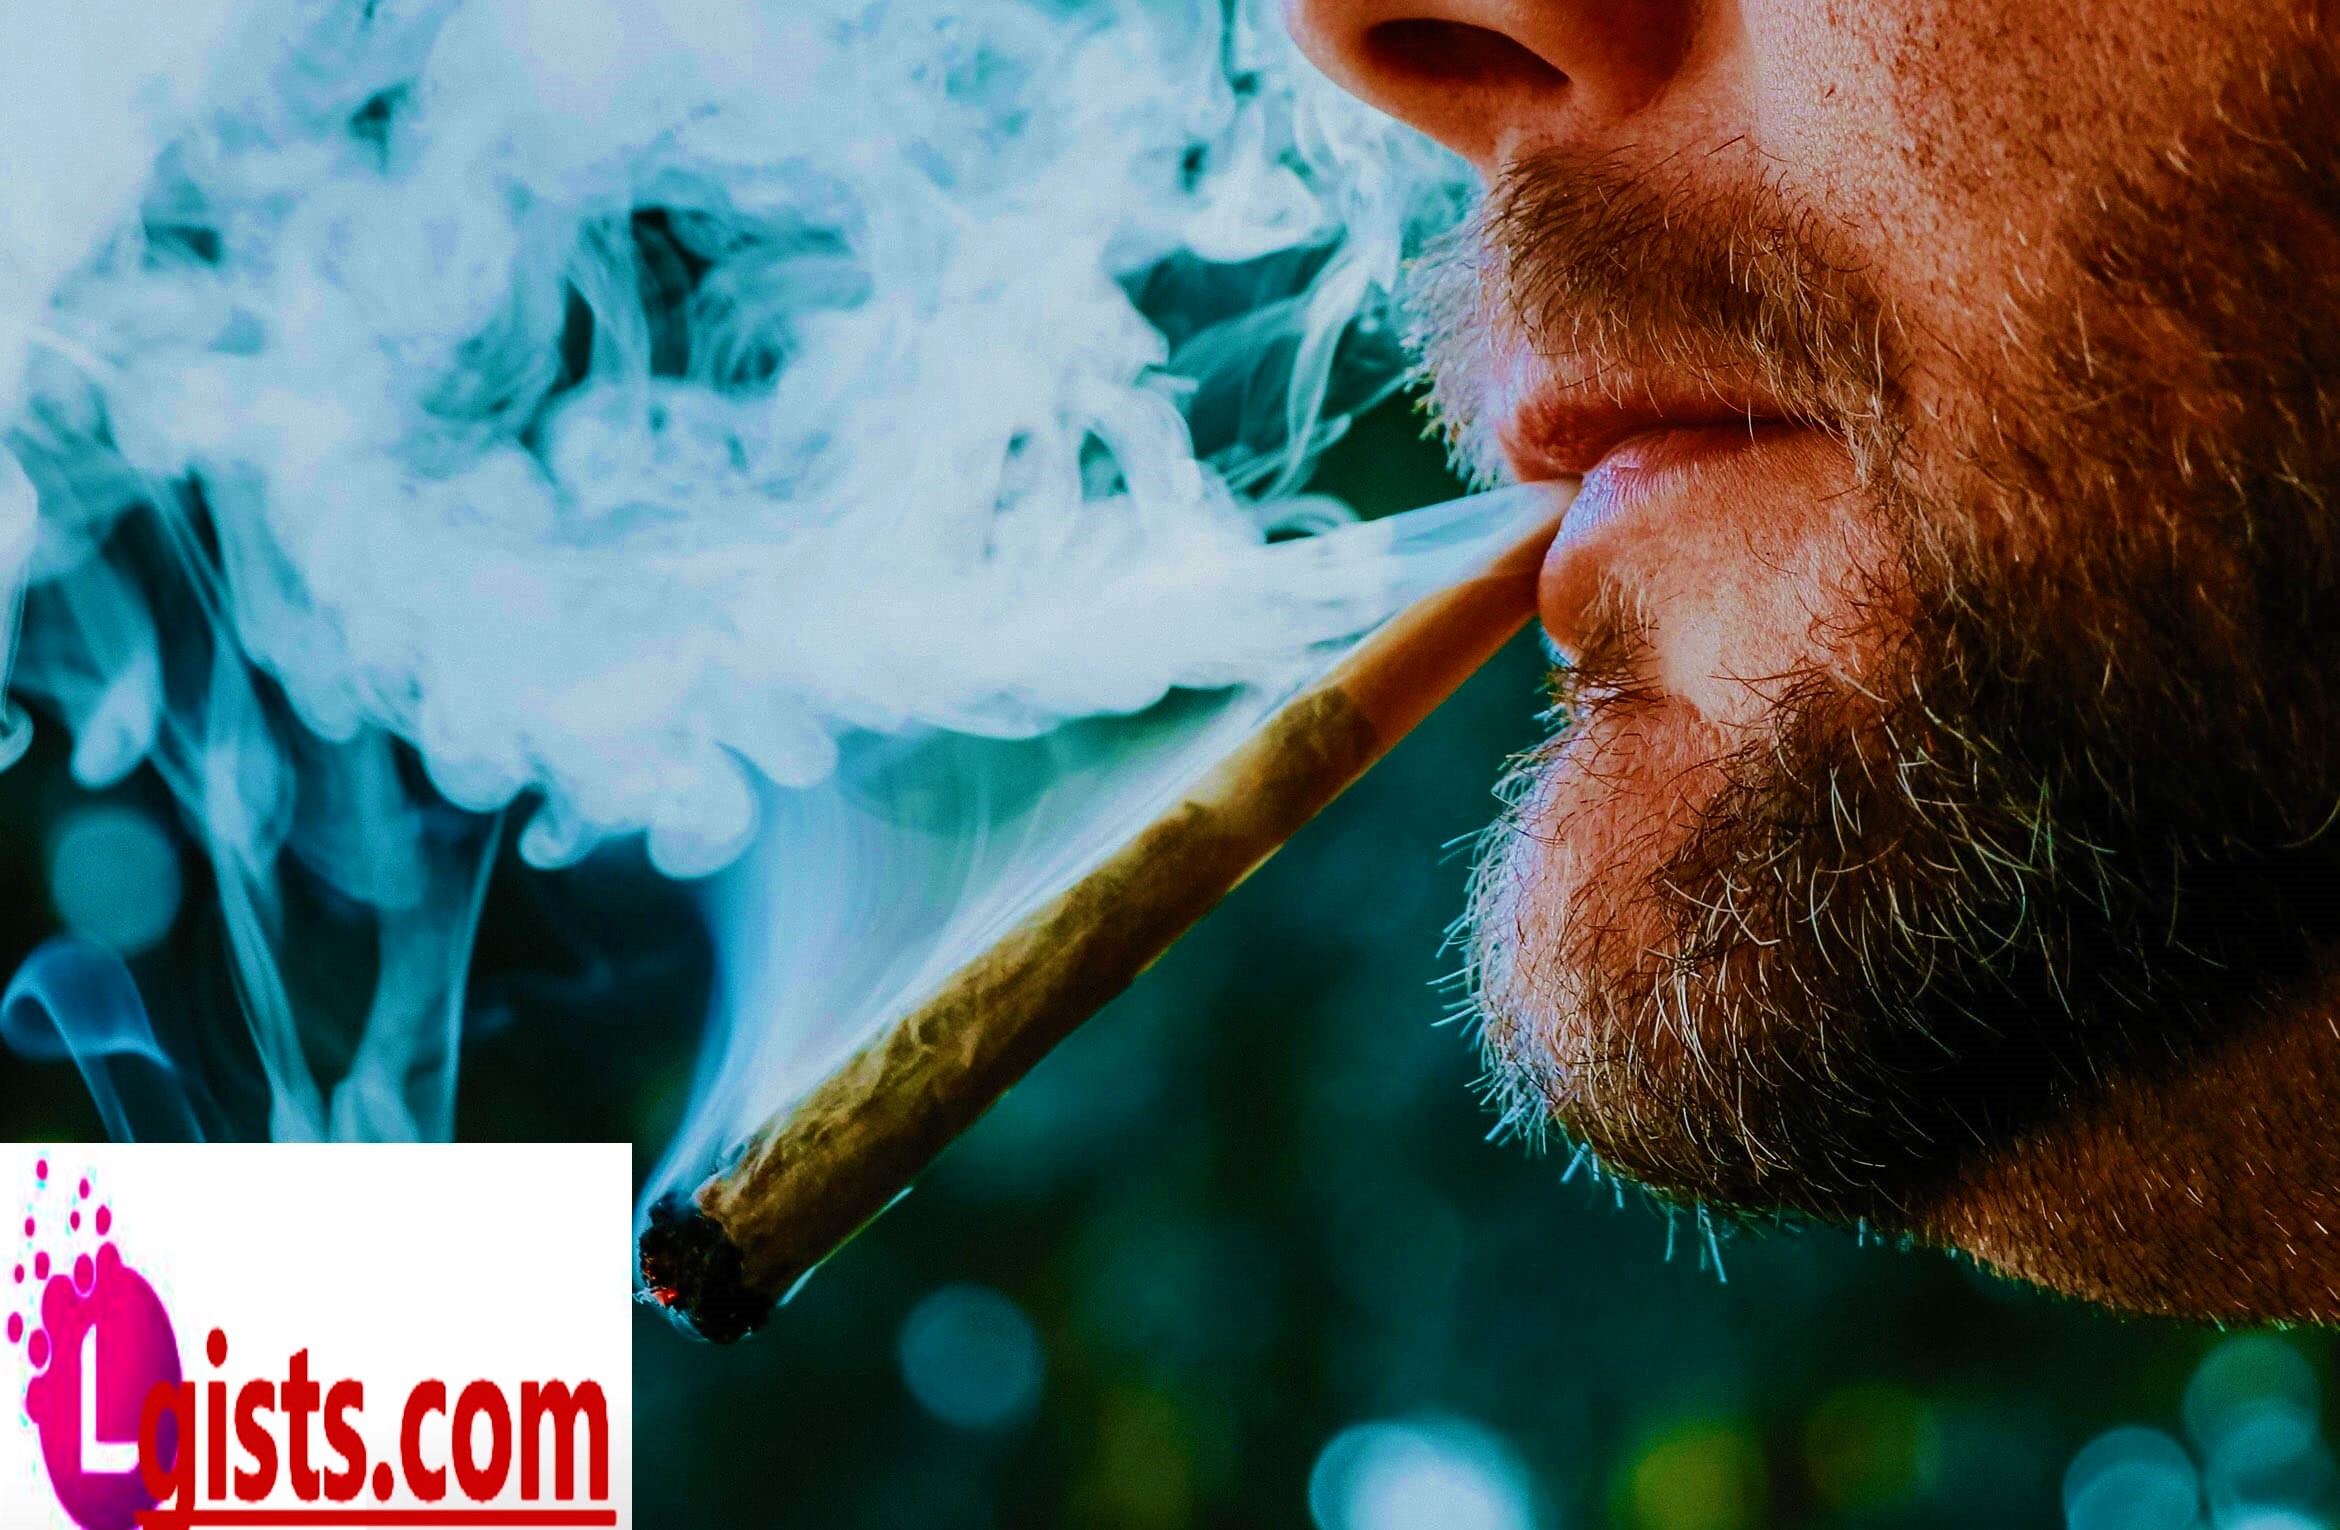 10 Tips for Quitting Smoking Weed